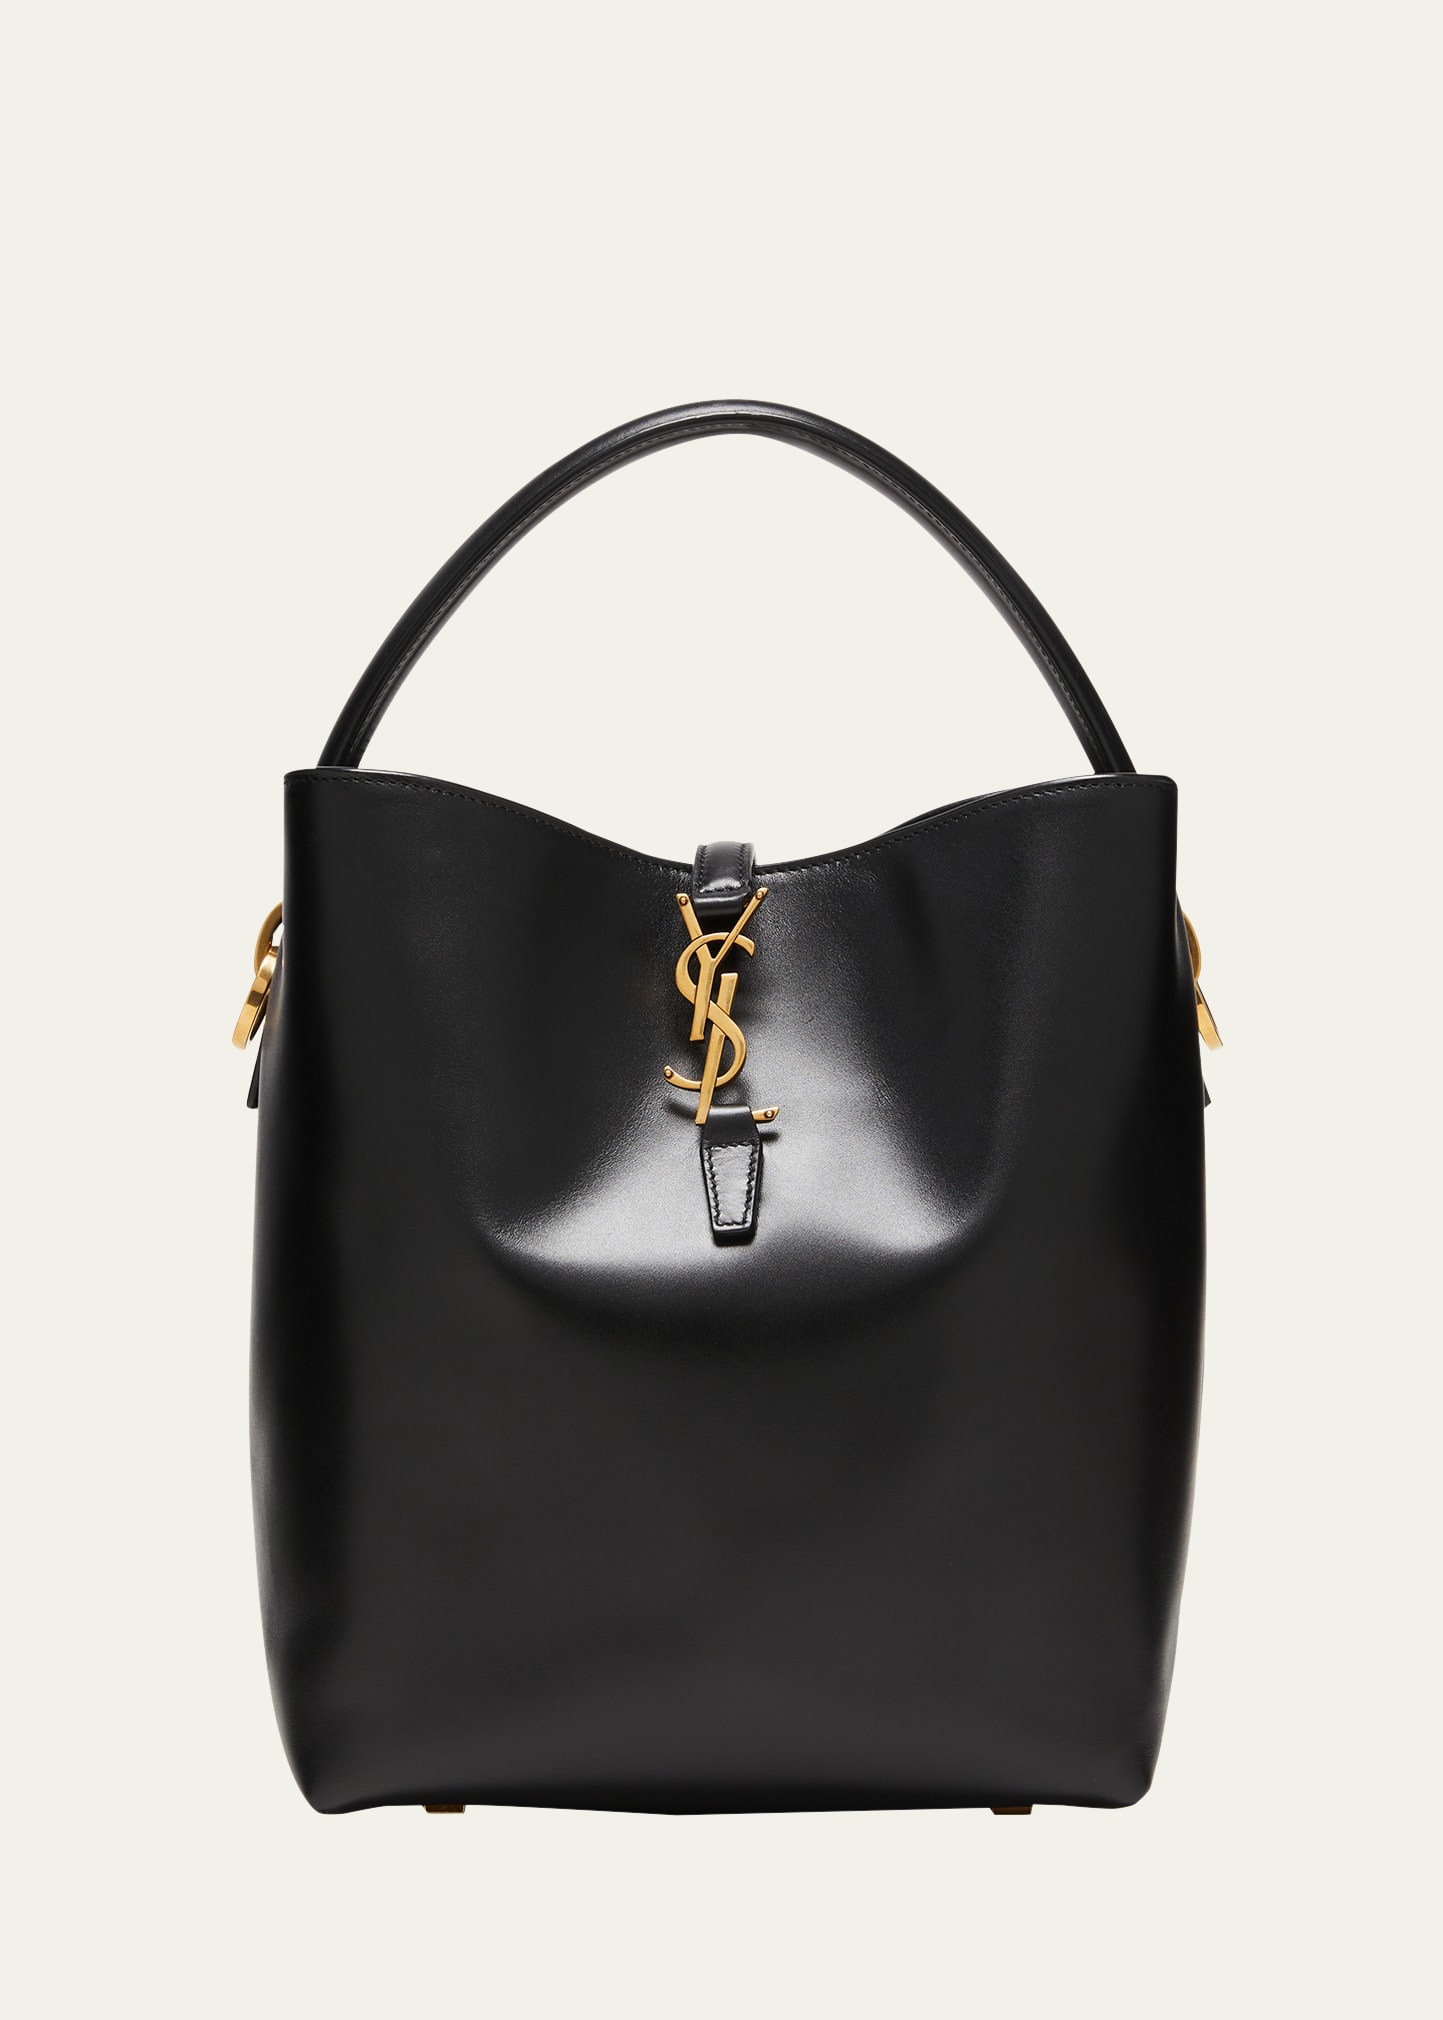 Le 37 YSL Bucket Bag in Smooth Leather